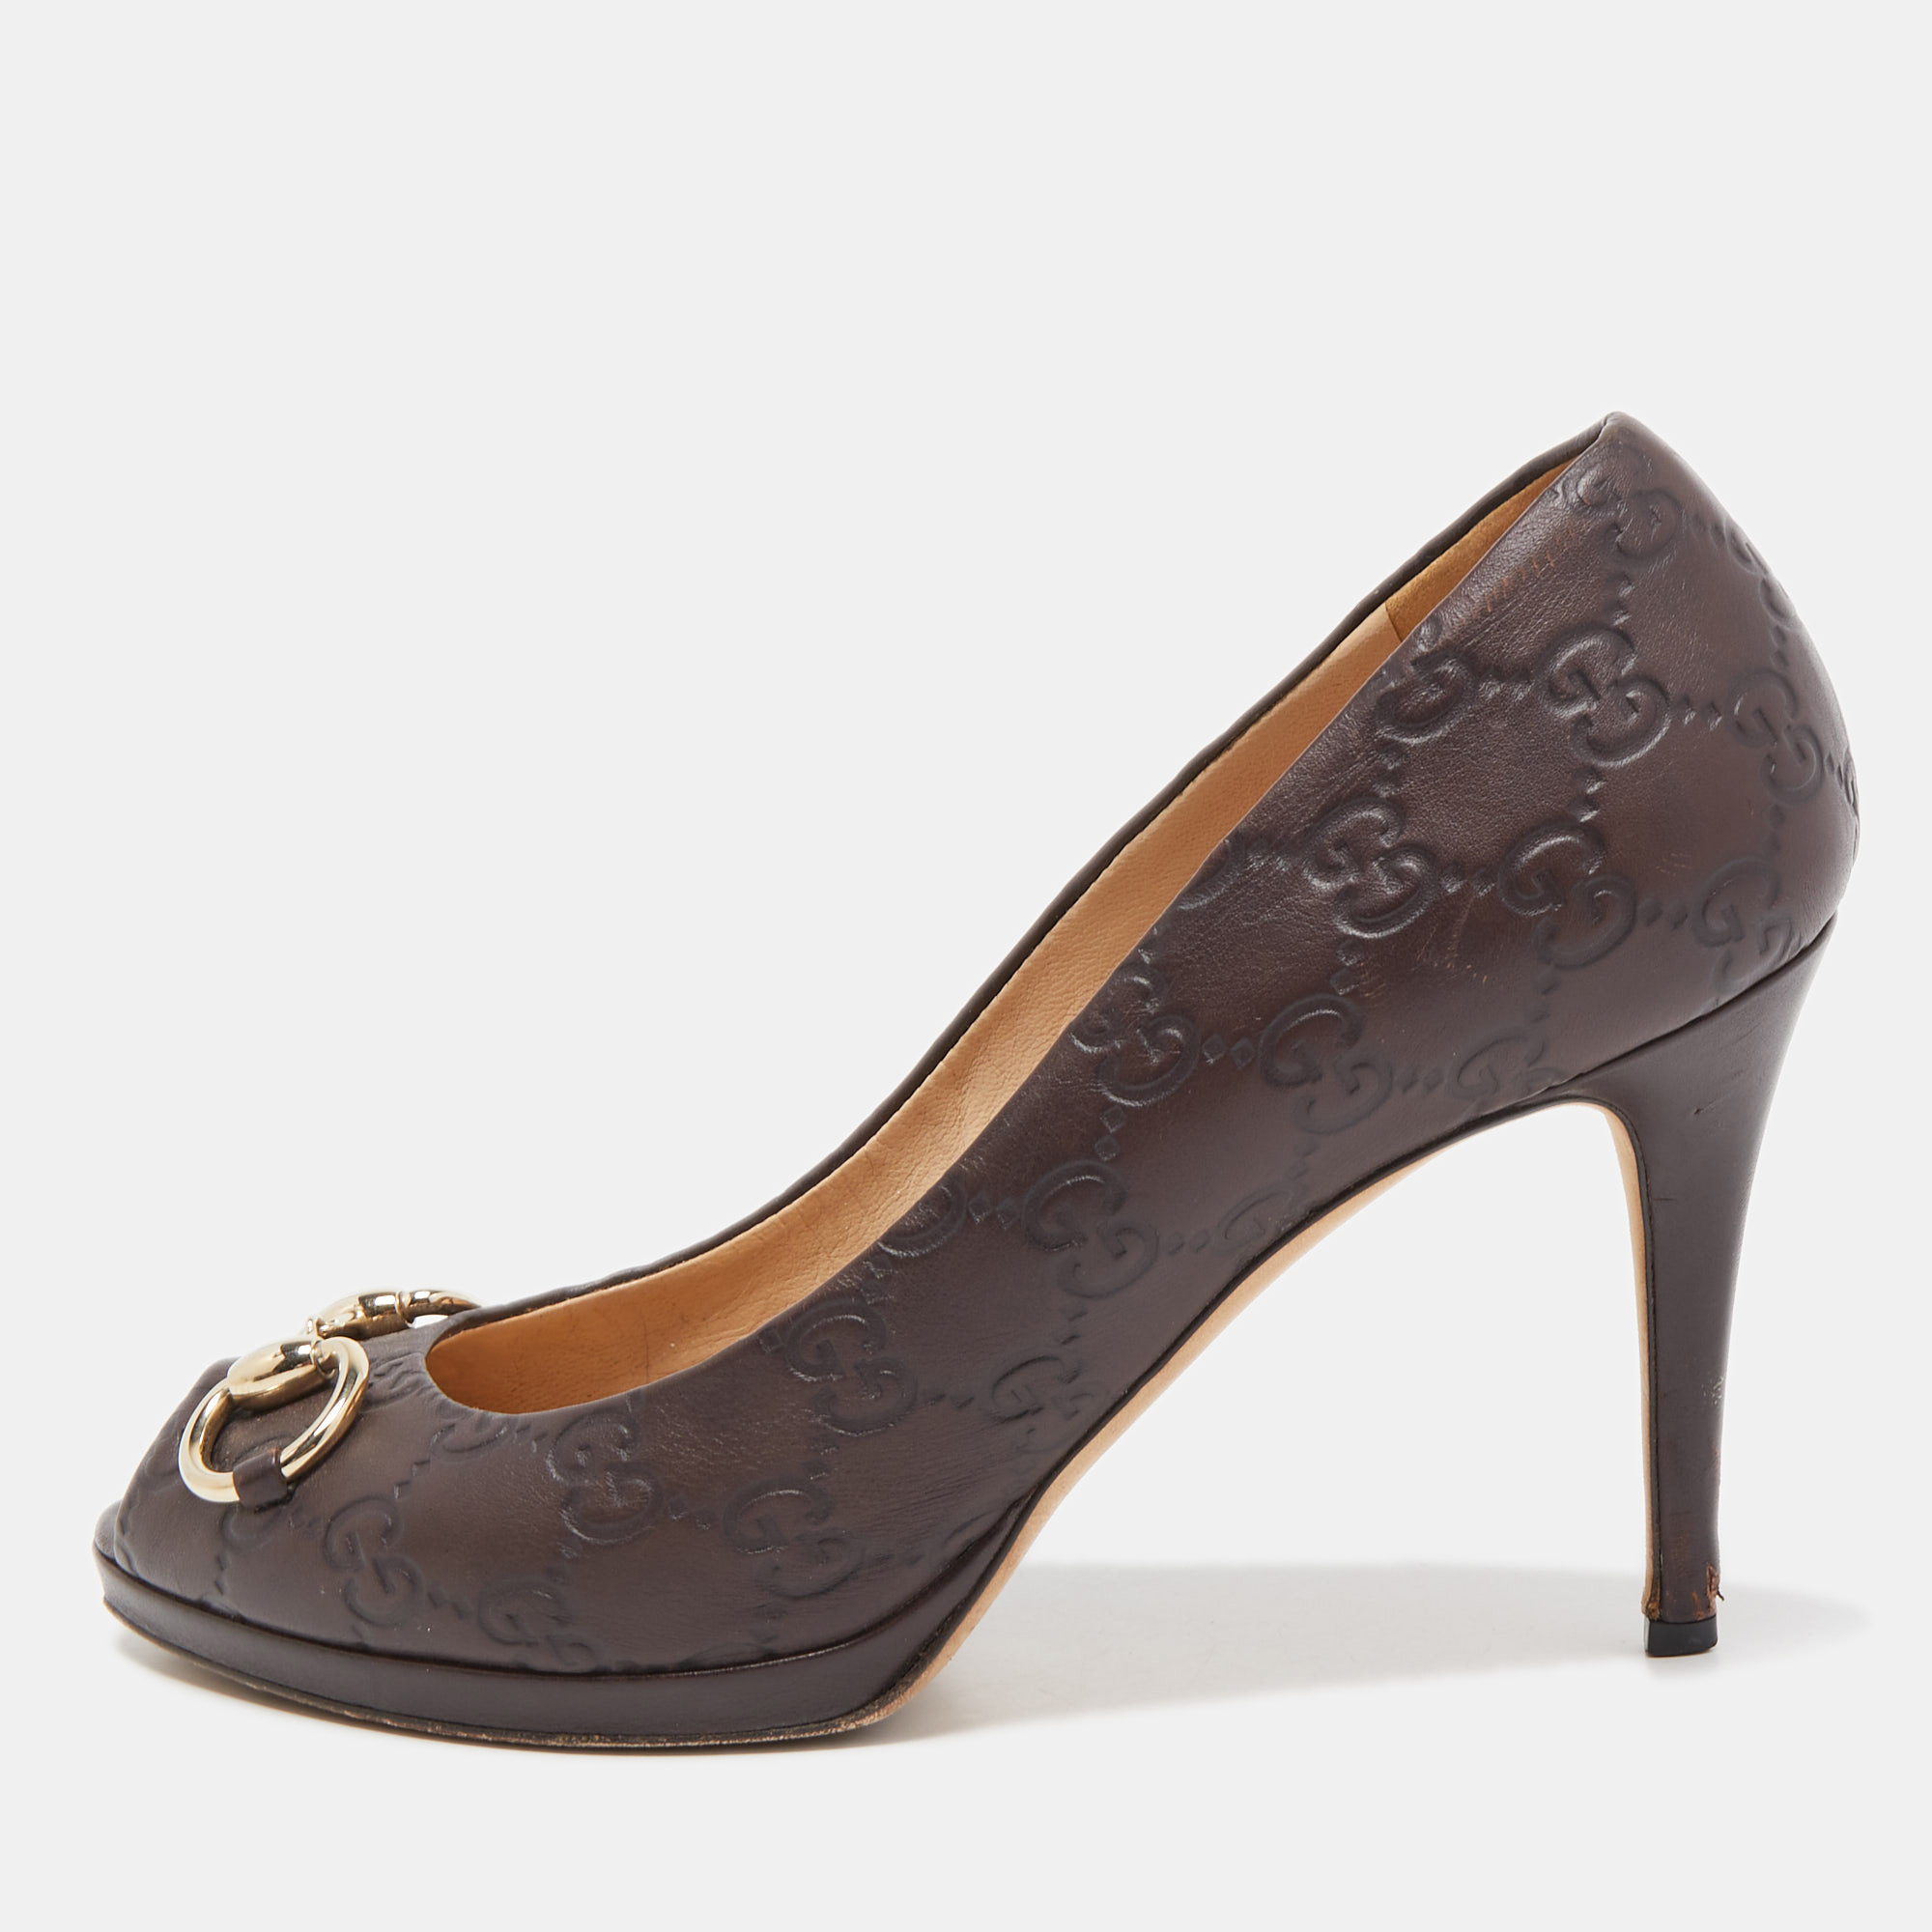 Gucci brown guccissima leather new hollywood pumps size 40